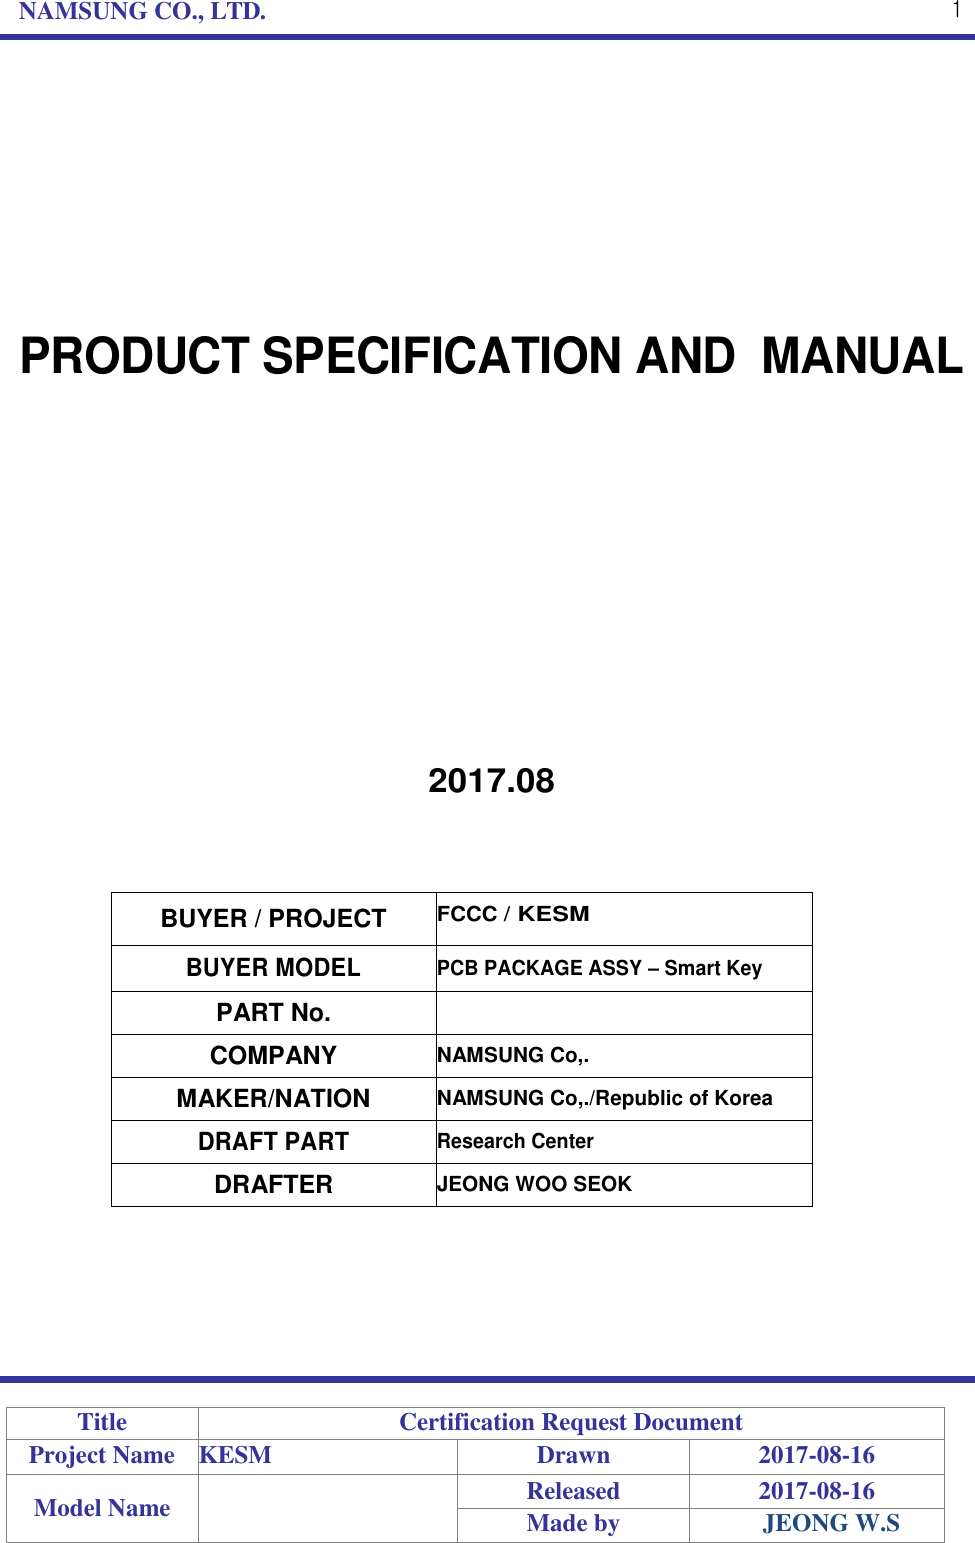 NAMSUNG CO., LTD. 1 PRODUCT SPECIFICATION AND  MANUAL 2017.08 BUYER / PROJECT FCCC / KESM BUYER MODEL PCB PACKAGE ASSY – Smart Key PART No. COMPANY NAMSUNG Co,. MAKER/NATION NAMSUNG Co,./Republic of Korea DRAFT PART Research Center DRAFTER JEONG WOO SEOK Title Certification Request Document Project Name KESM Drawn 2017-08-16 Model Name Released 2017-08-16 Made by JEONG W.S 